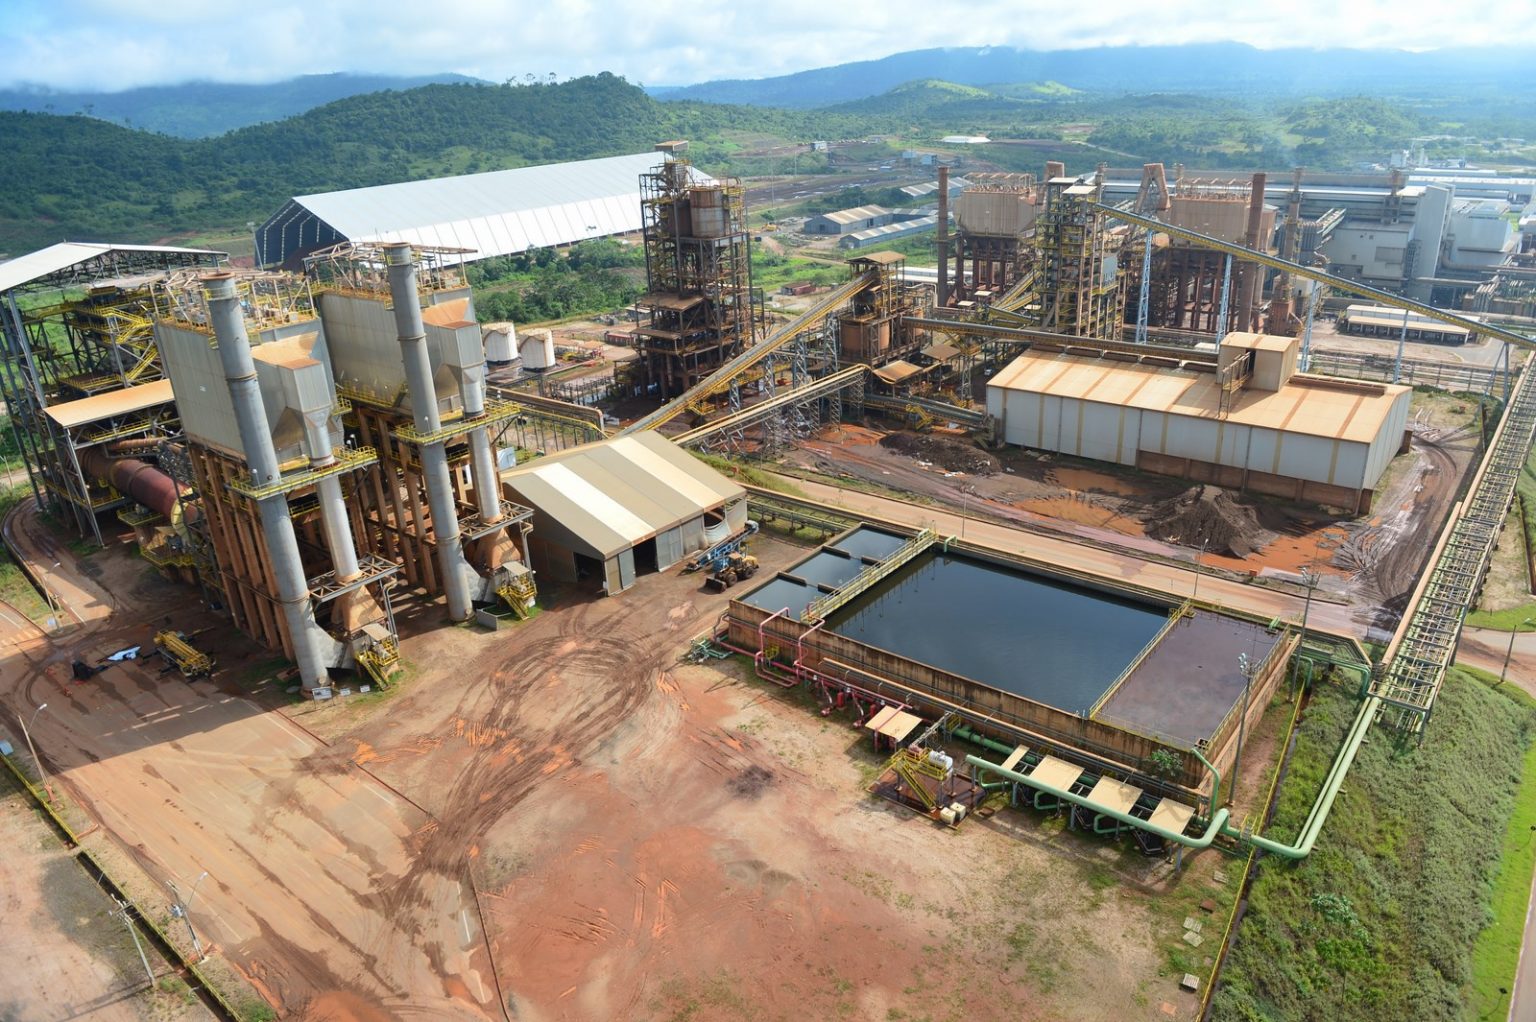 Vale reopens Onça Puma after government idle - Miners News Global